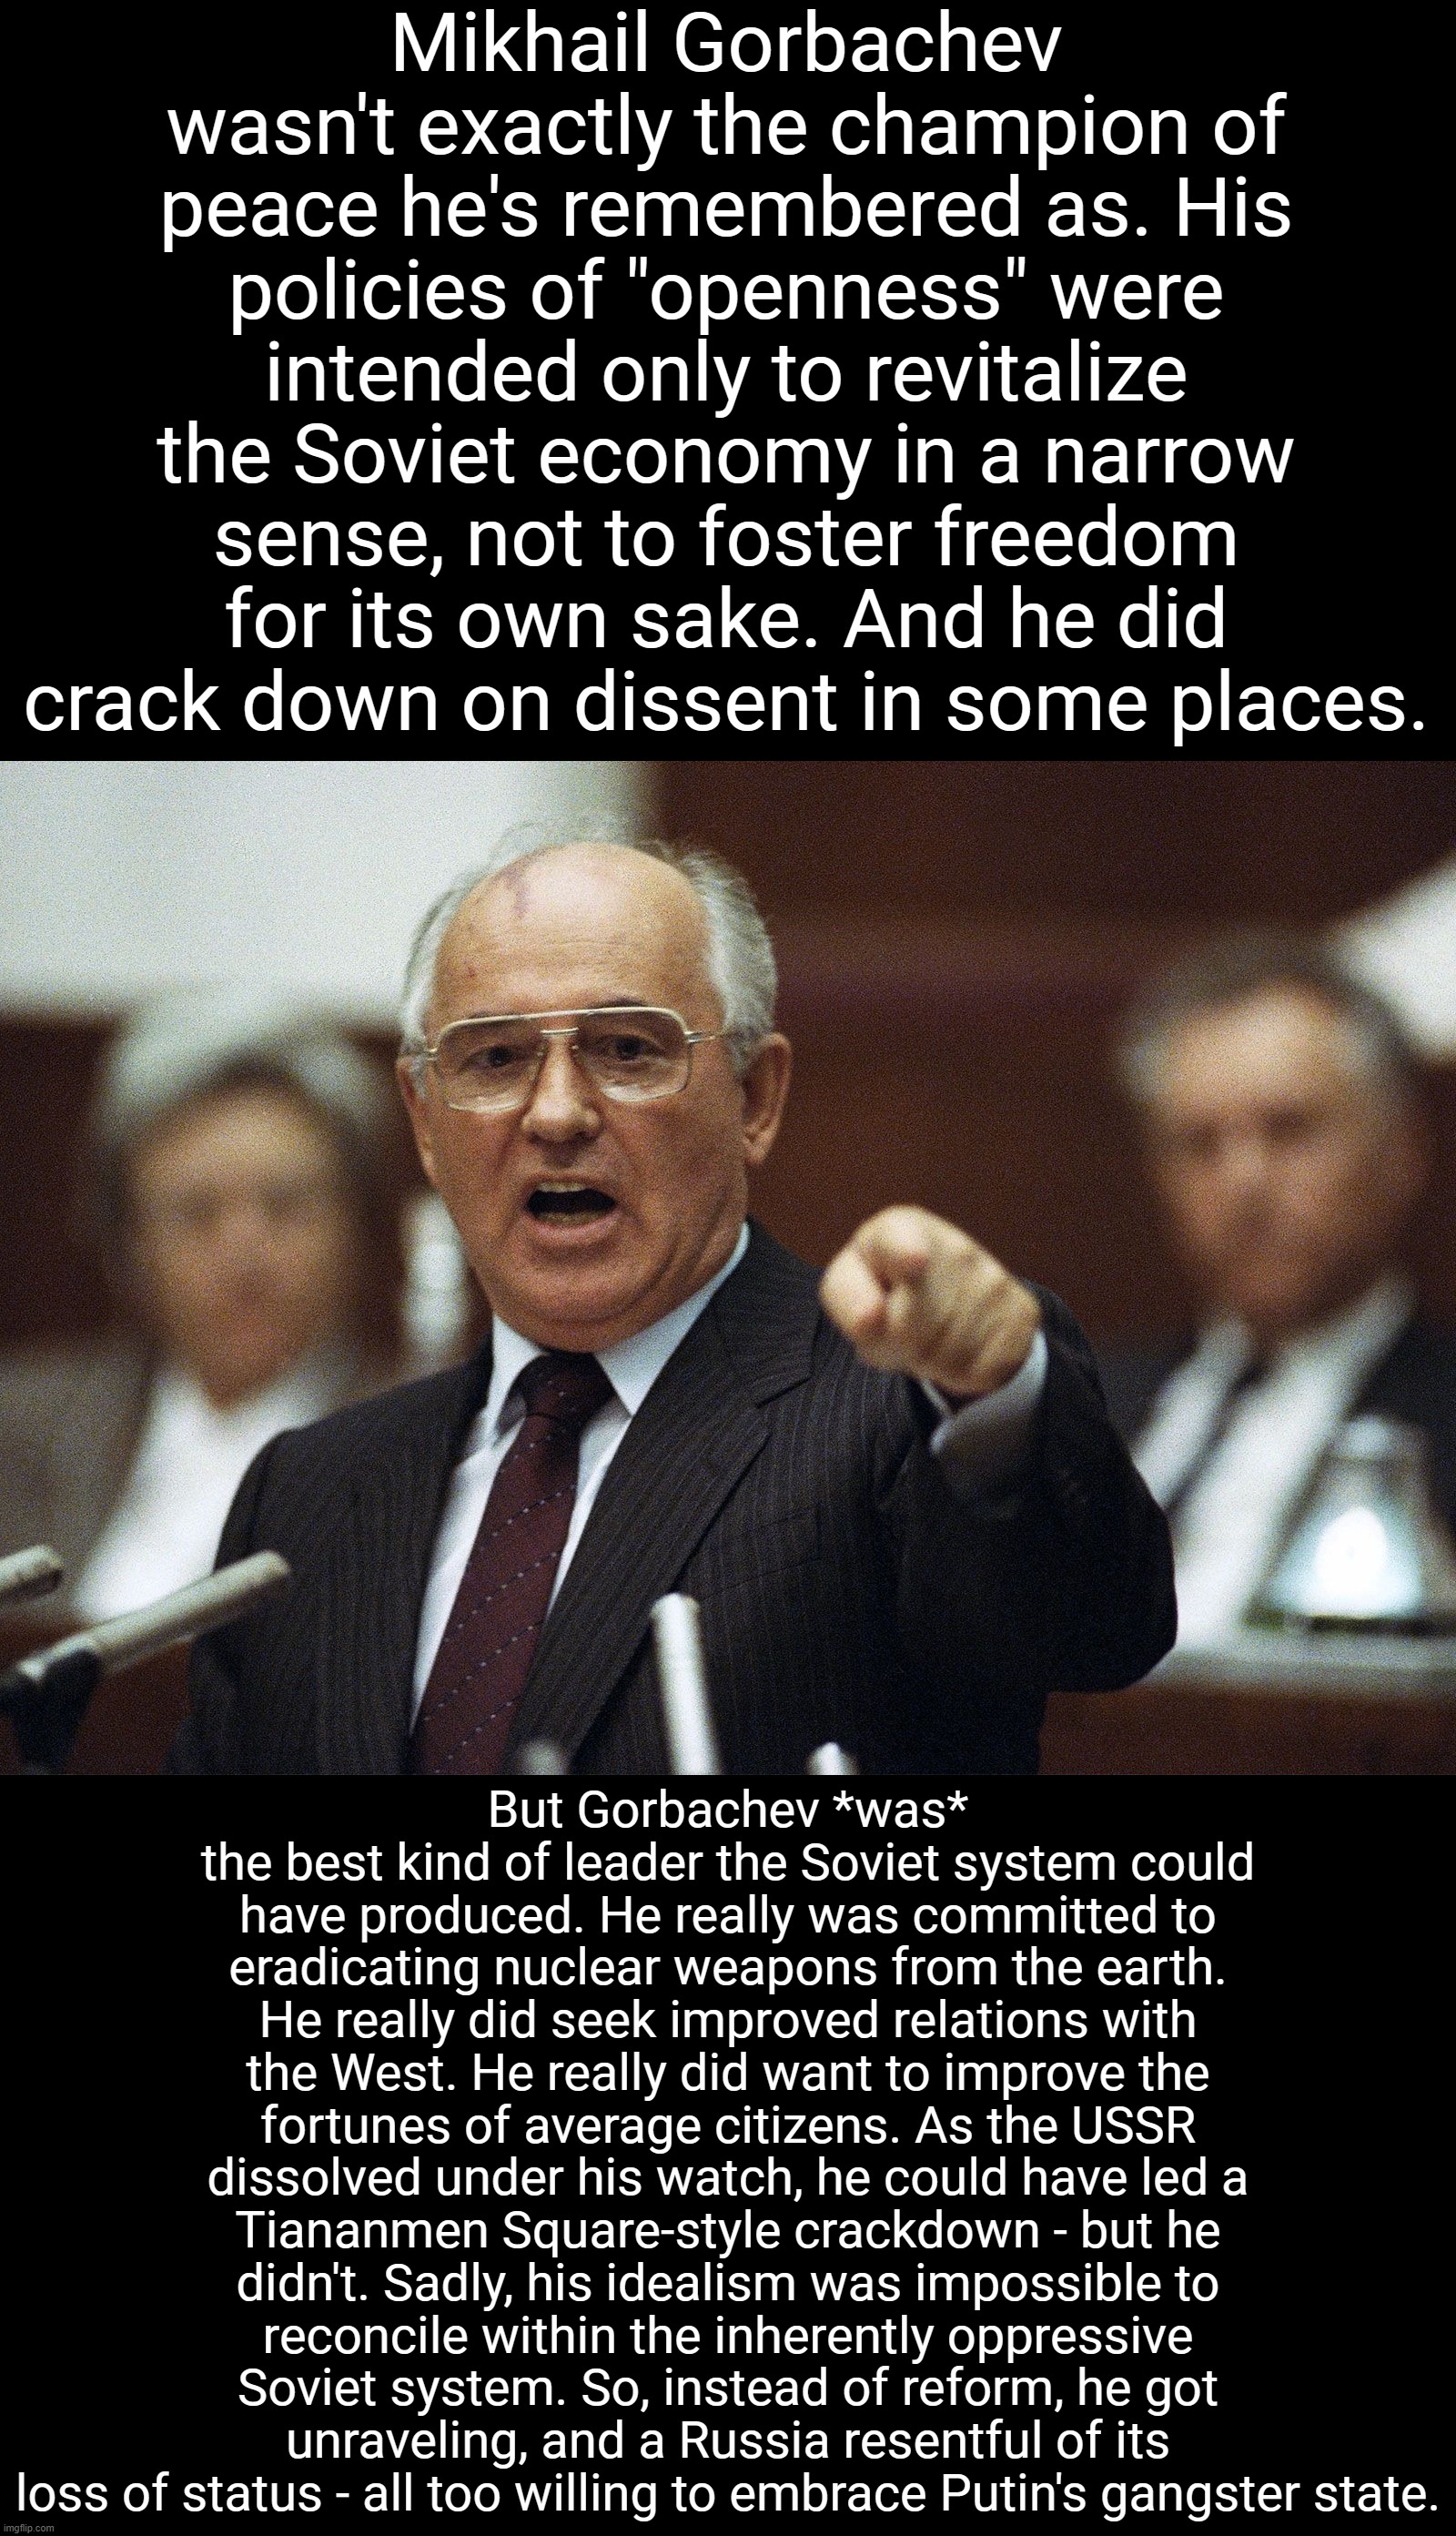 Gorbachev's tragedy still haunts us to this day. R.I.P. to a genuine leader. | Mikhail Gorbachev wasn't exactly the champion of peace he's remembered as. His policies of "openness" were intended only to revitalize the Soviet economy in a narrow sense, not to foster freedom for its own sake. And he did crack down on dissent in some places. But Gorbachev *was* the best kind of leader the Soviet system could have produced. He really was committed to eradicating nuclear weapons from the earth. He really did seek improved relations with the West. He really did want to improve the fortunes of average citizens. As the USSR dissolved under his watch, he could have led a Tiananmen Square-style crackdown - but he didn't. Sadly, his idealism was impossible to reconcile within the inherently oppressive Soviet system. So, instead of reform, he got unraveling, and a Russia resentful of its loss of status - all too willing to embrace Putin's gangster state. | image tagged in mikhail gorbachev,ussr,russia,soviet union,soviet russia,putin | made w/ Imgflip meme maker